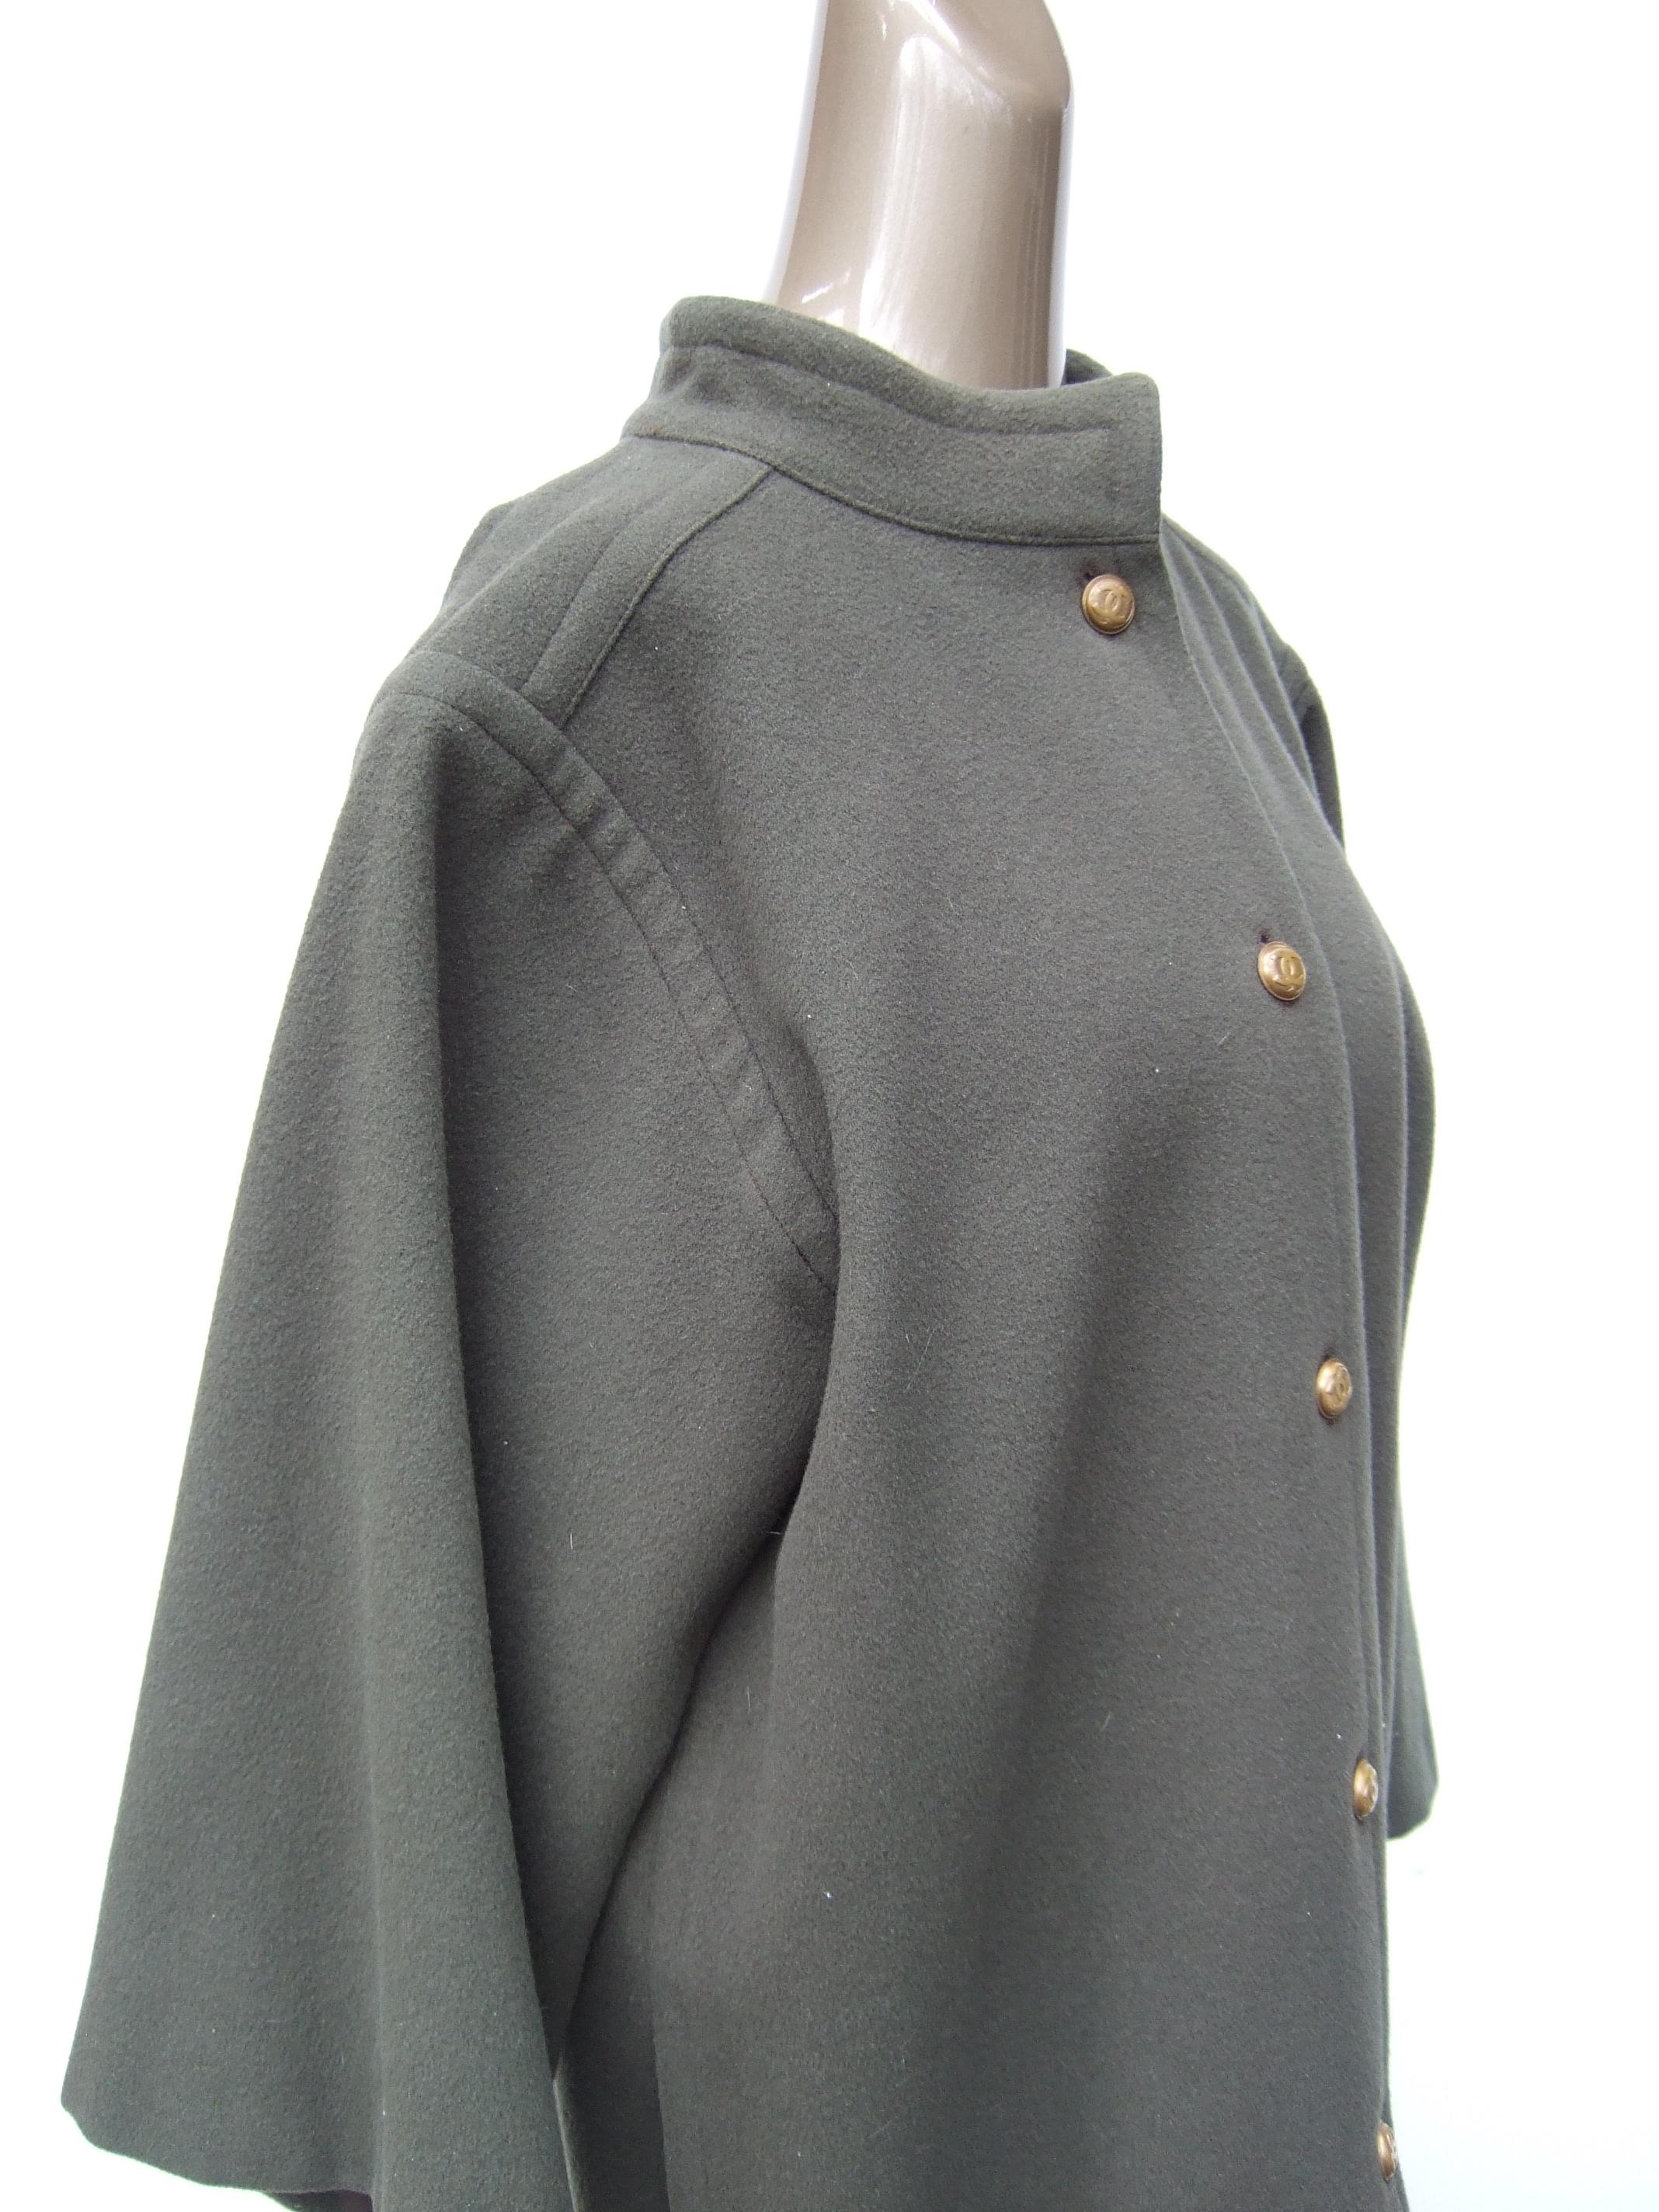 Women's CHANEL Creations Muted Gray - Green Wool Coat with C.C. Buttons c 1980s For Sale